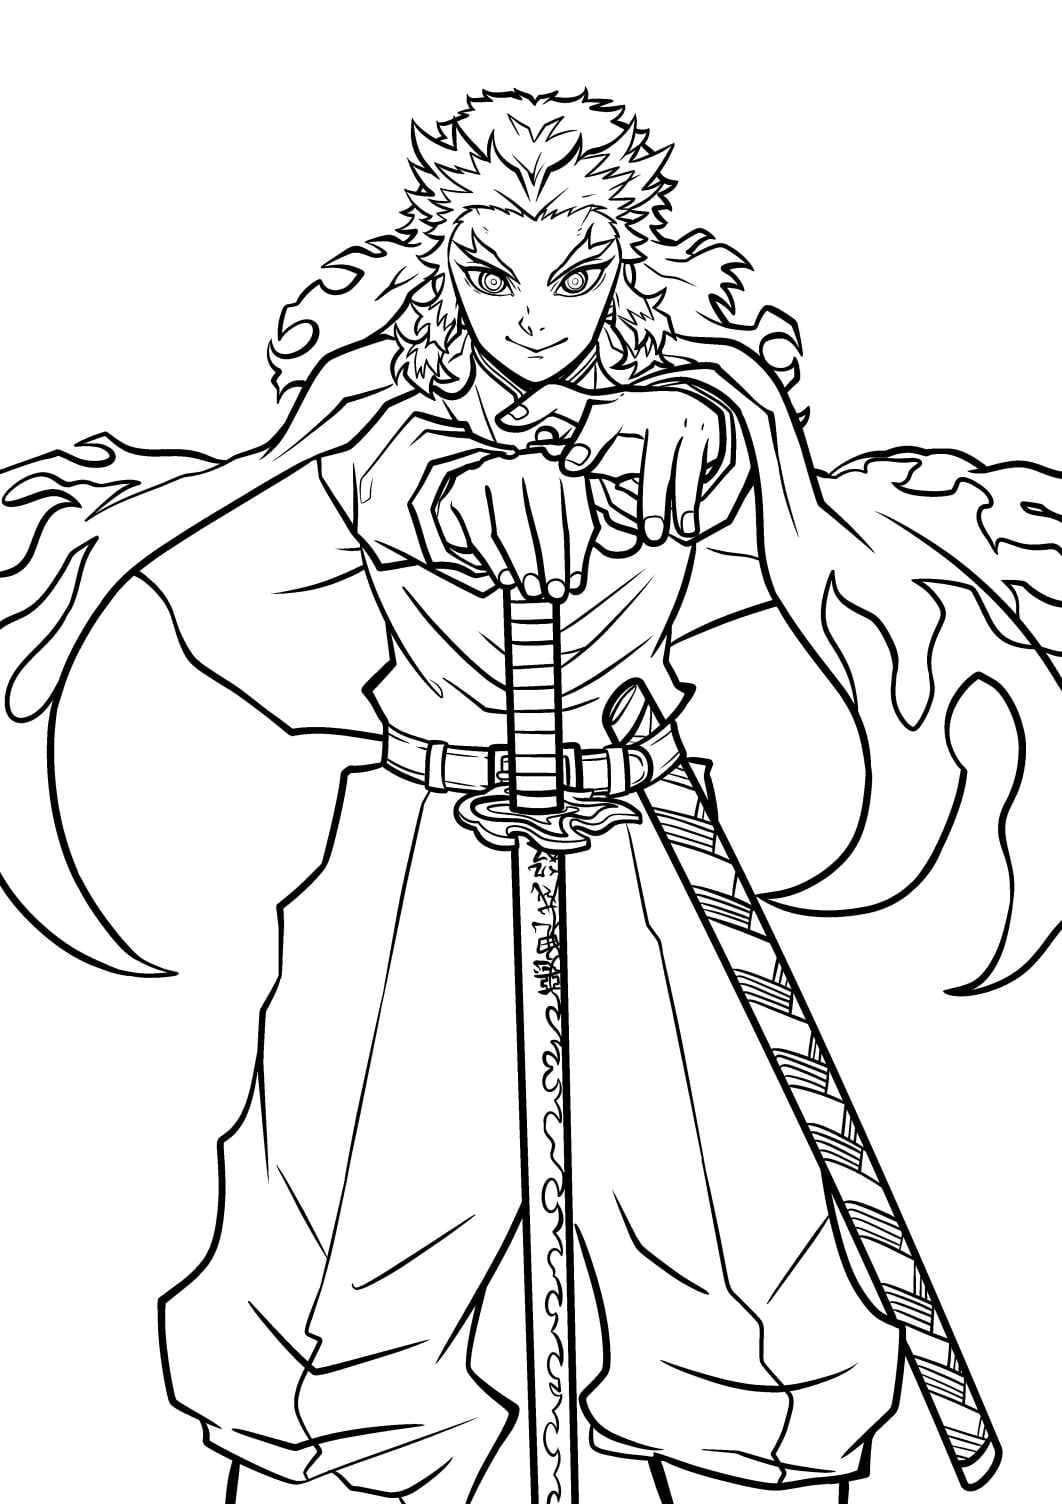 Kyojuro Rengoku Coloring Pages - Free Printable Coloring Pages for Kids